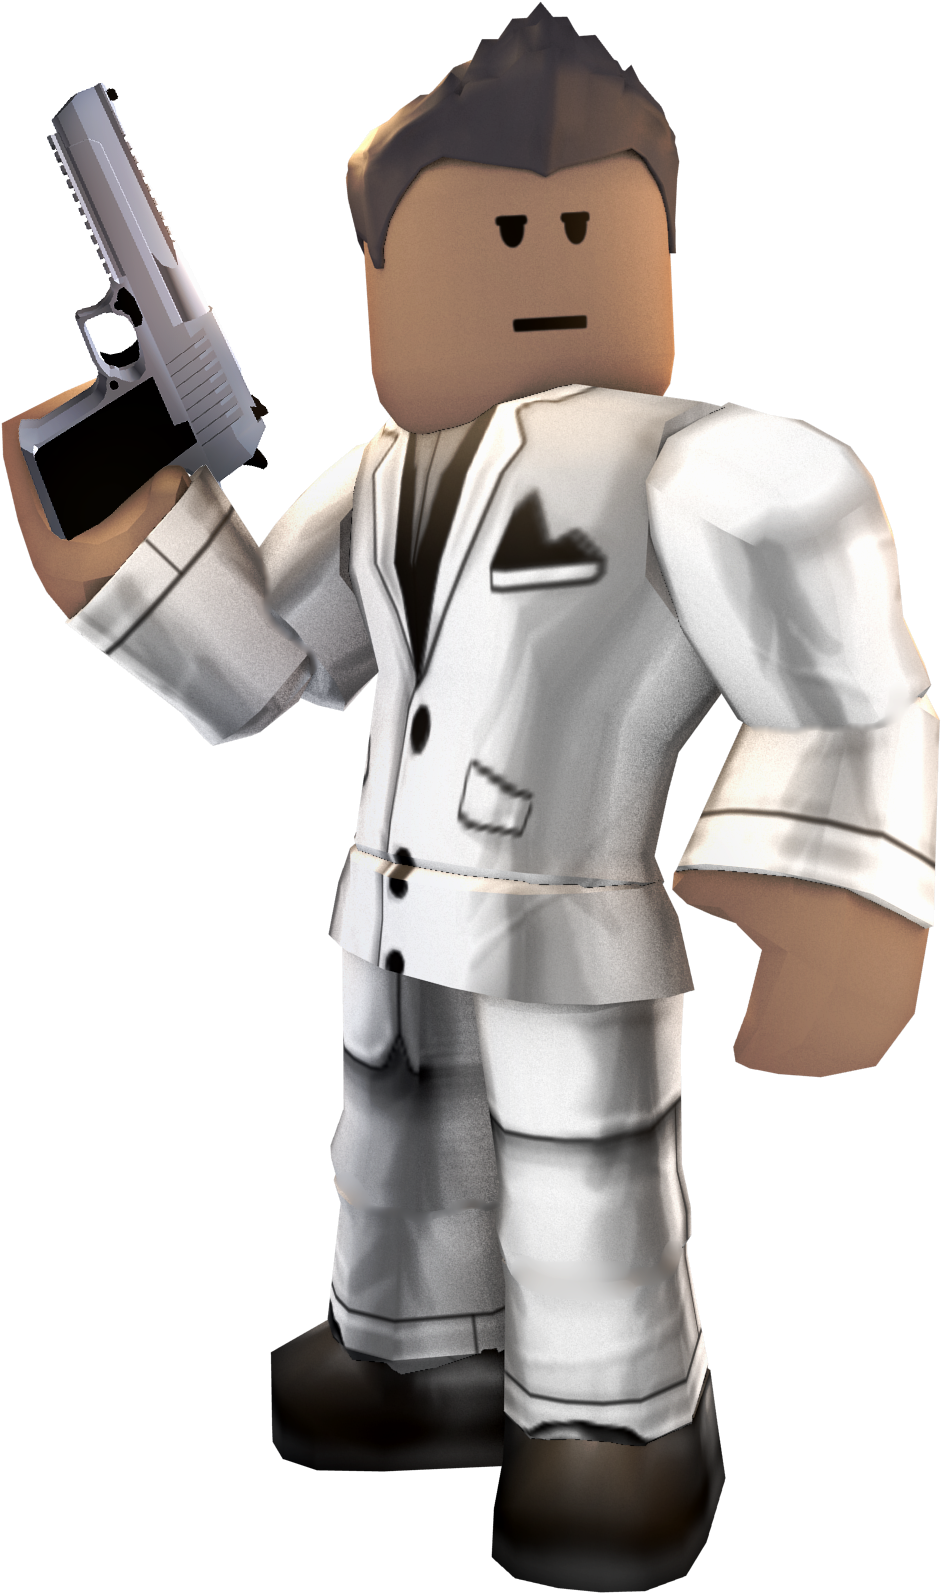 Download Roblox Characterin Suitwith Gun | Wallpapers.com